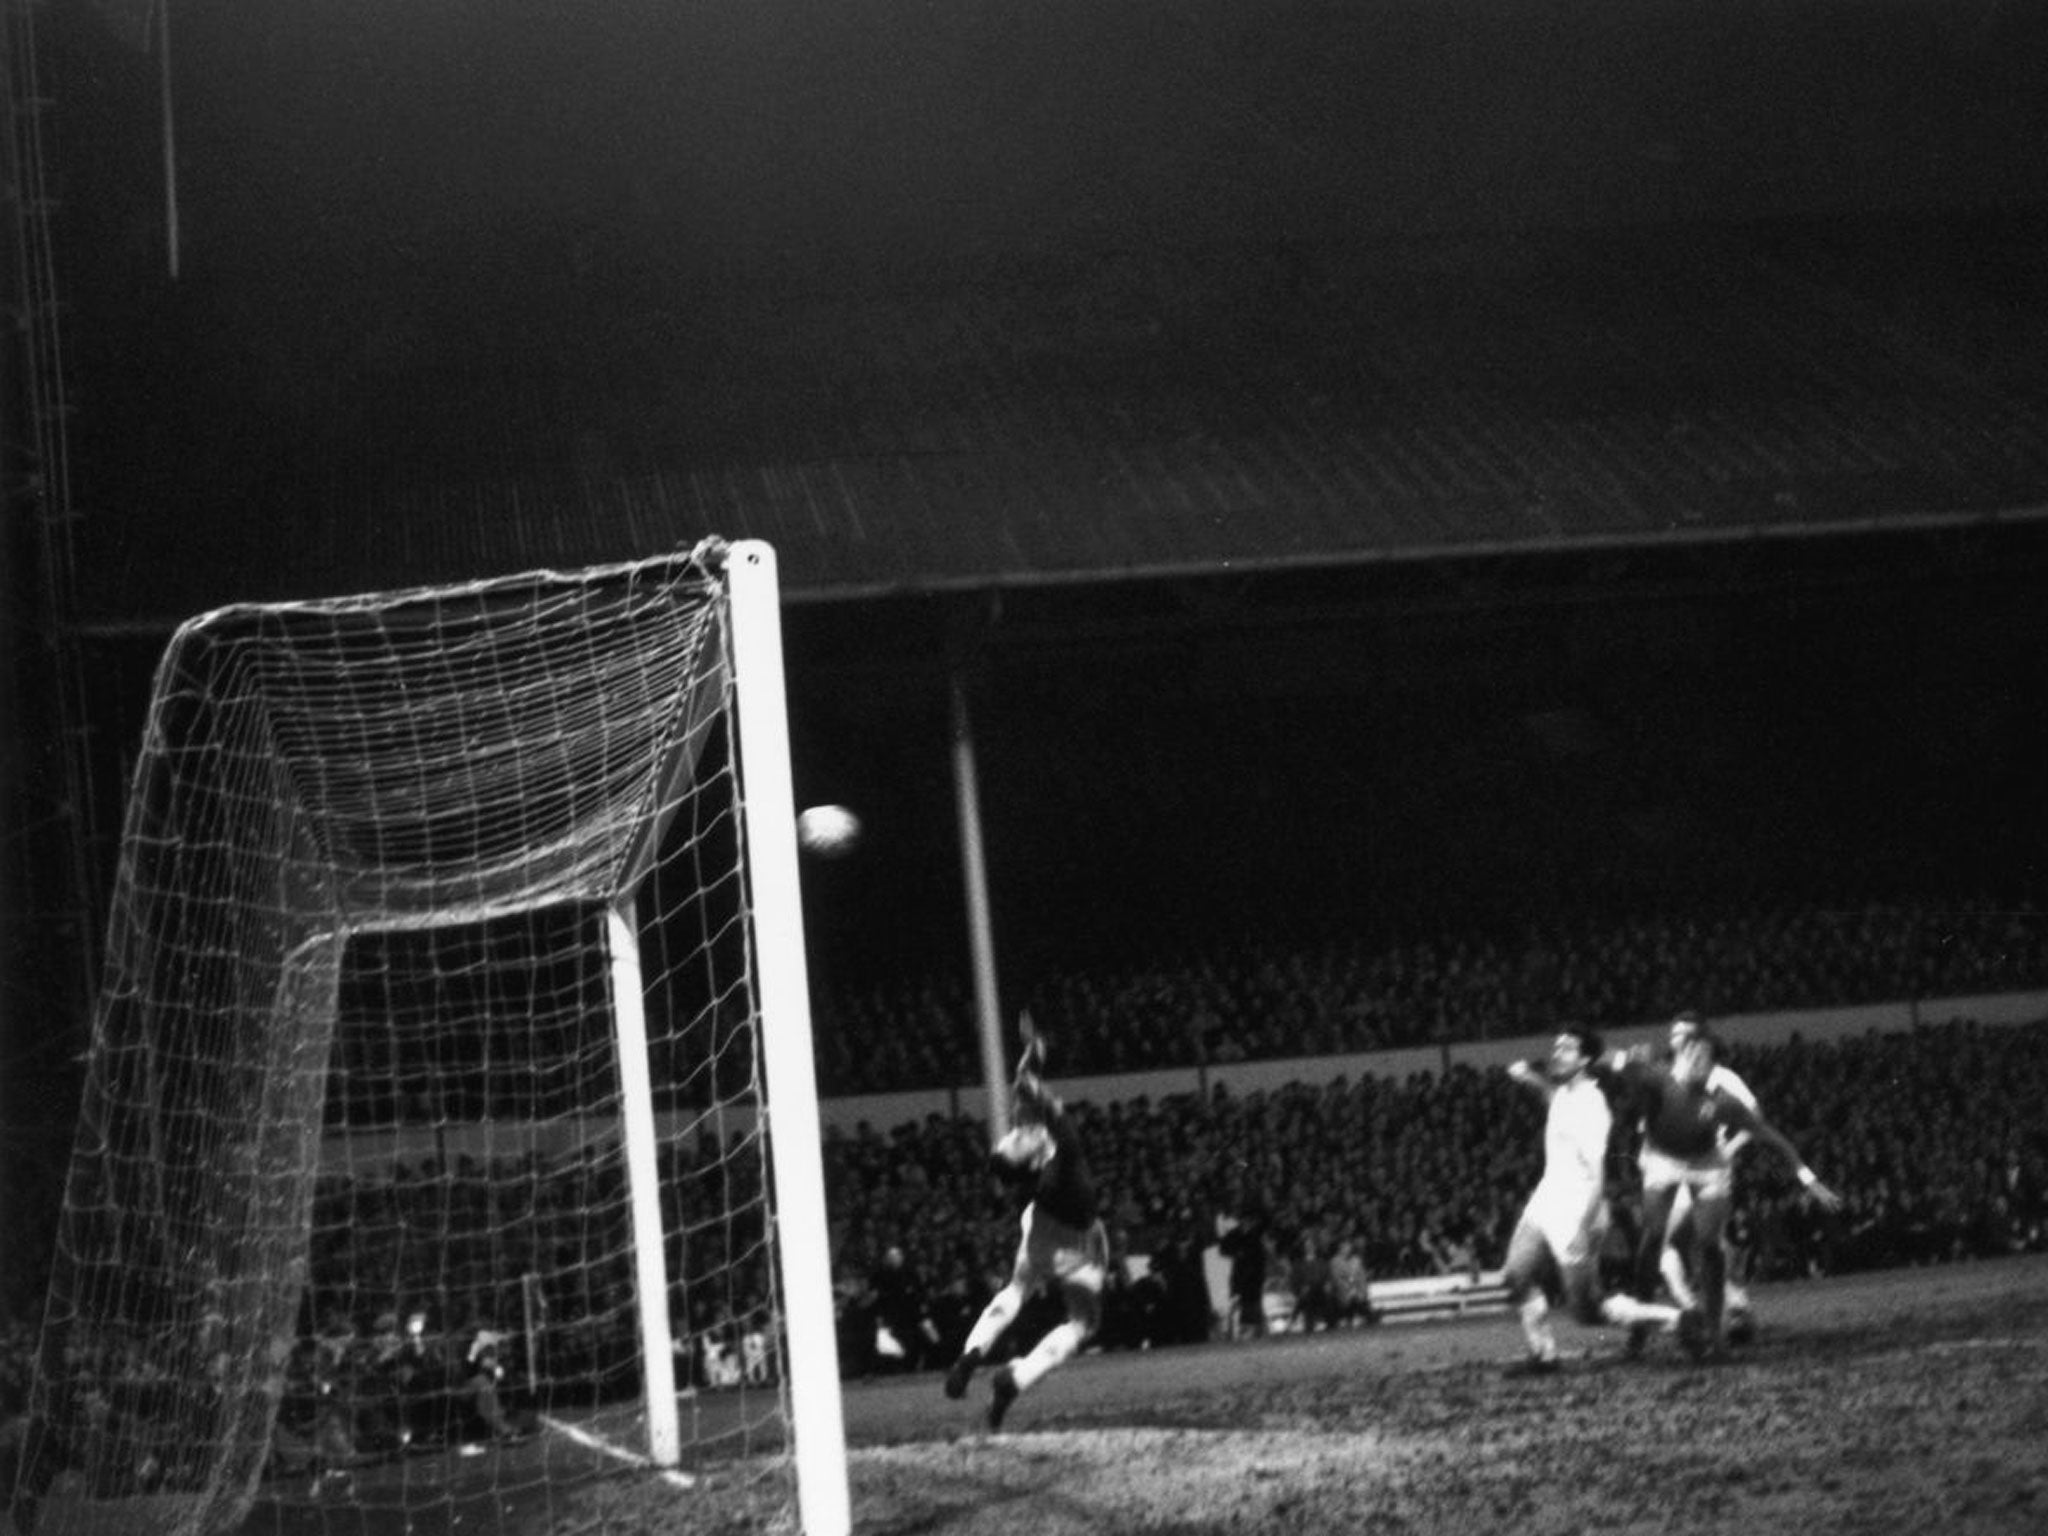 Benfica keeper Costa Pereira saves a header from Maurice Norman